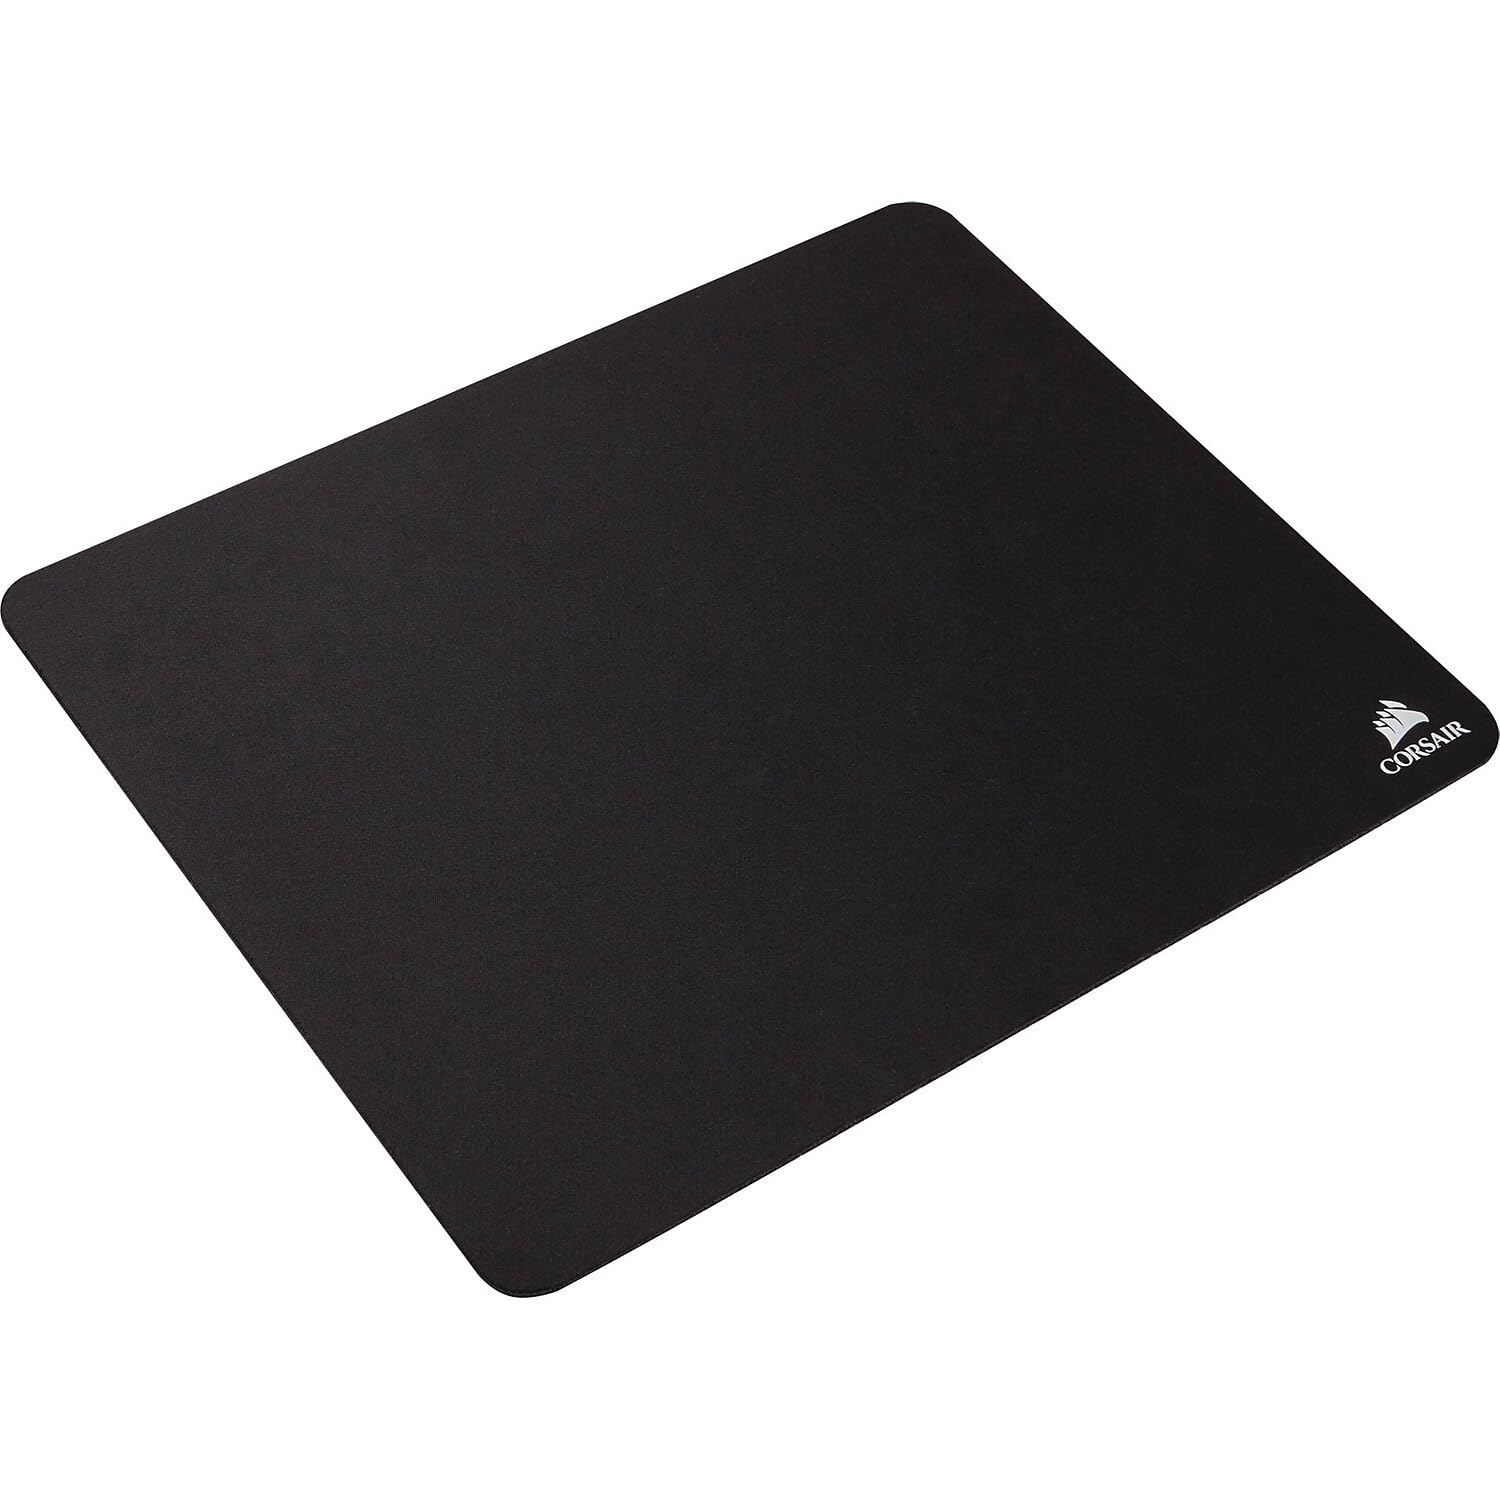 12.5" x 10.5" Corsair MM100 Cloth Gaming Mousepad (Black) $5 + Free Shipping w/ Prime or on $35+